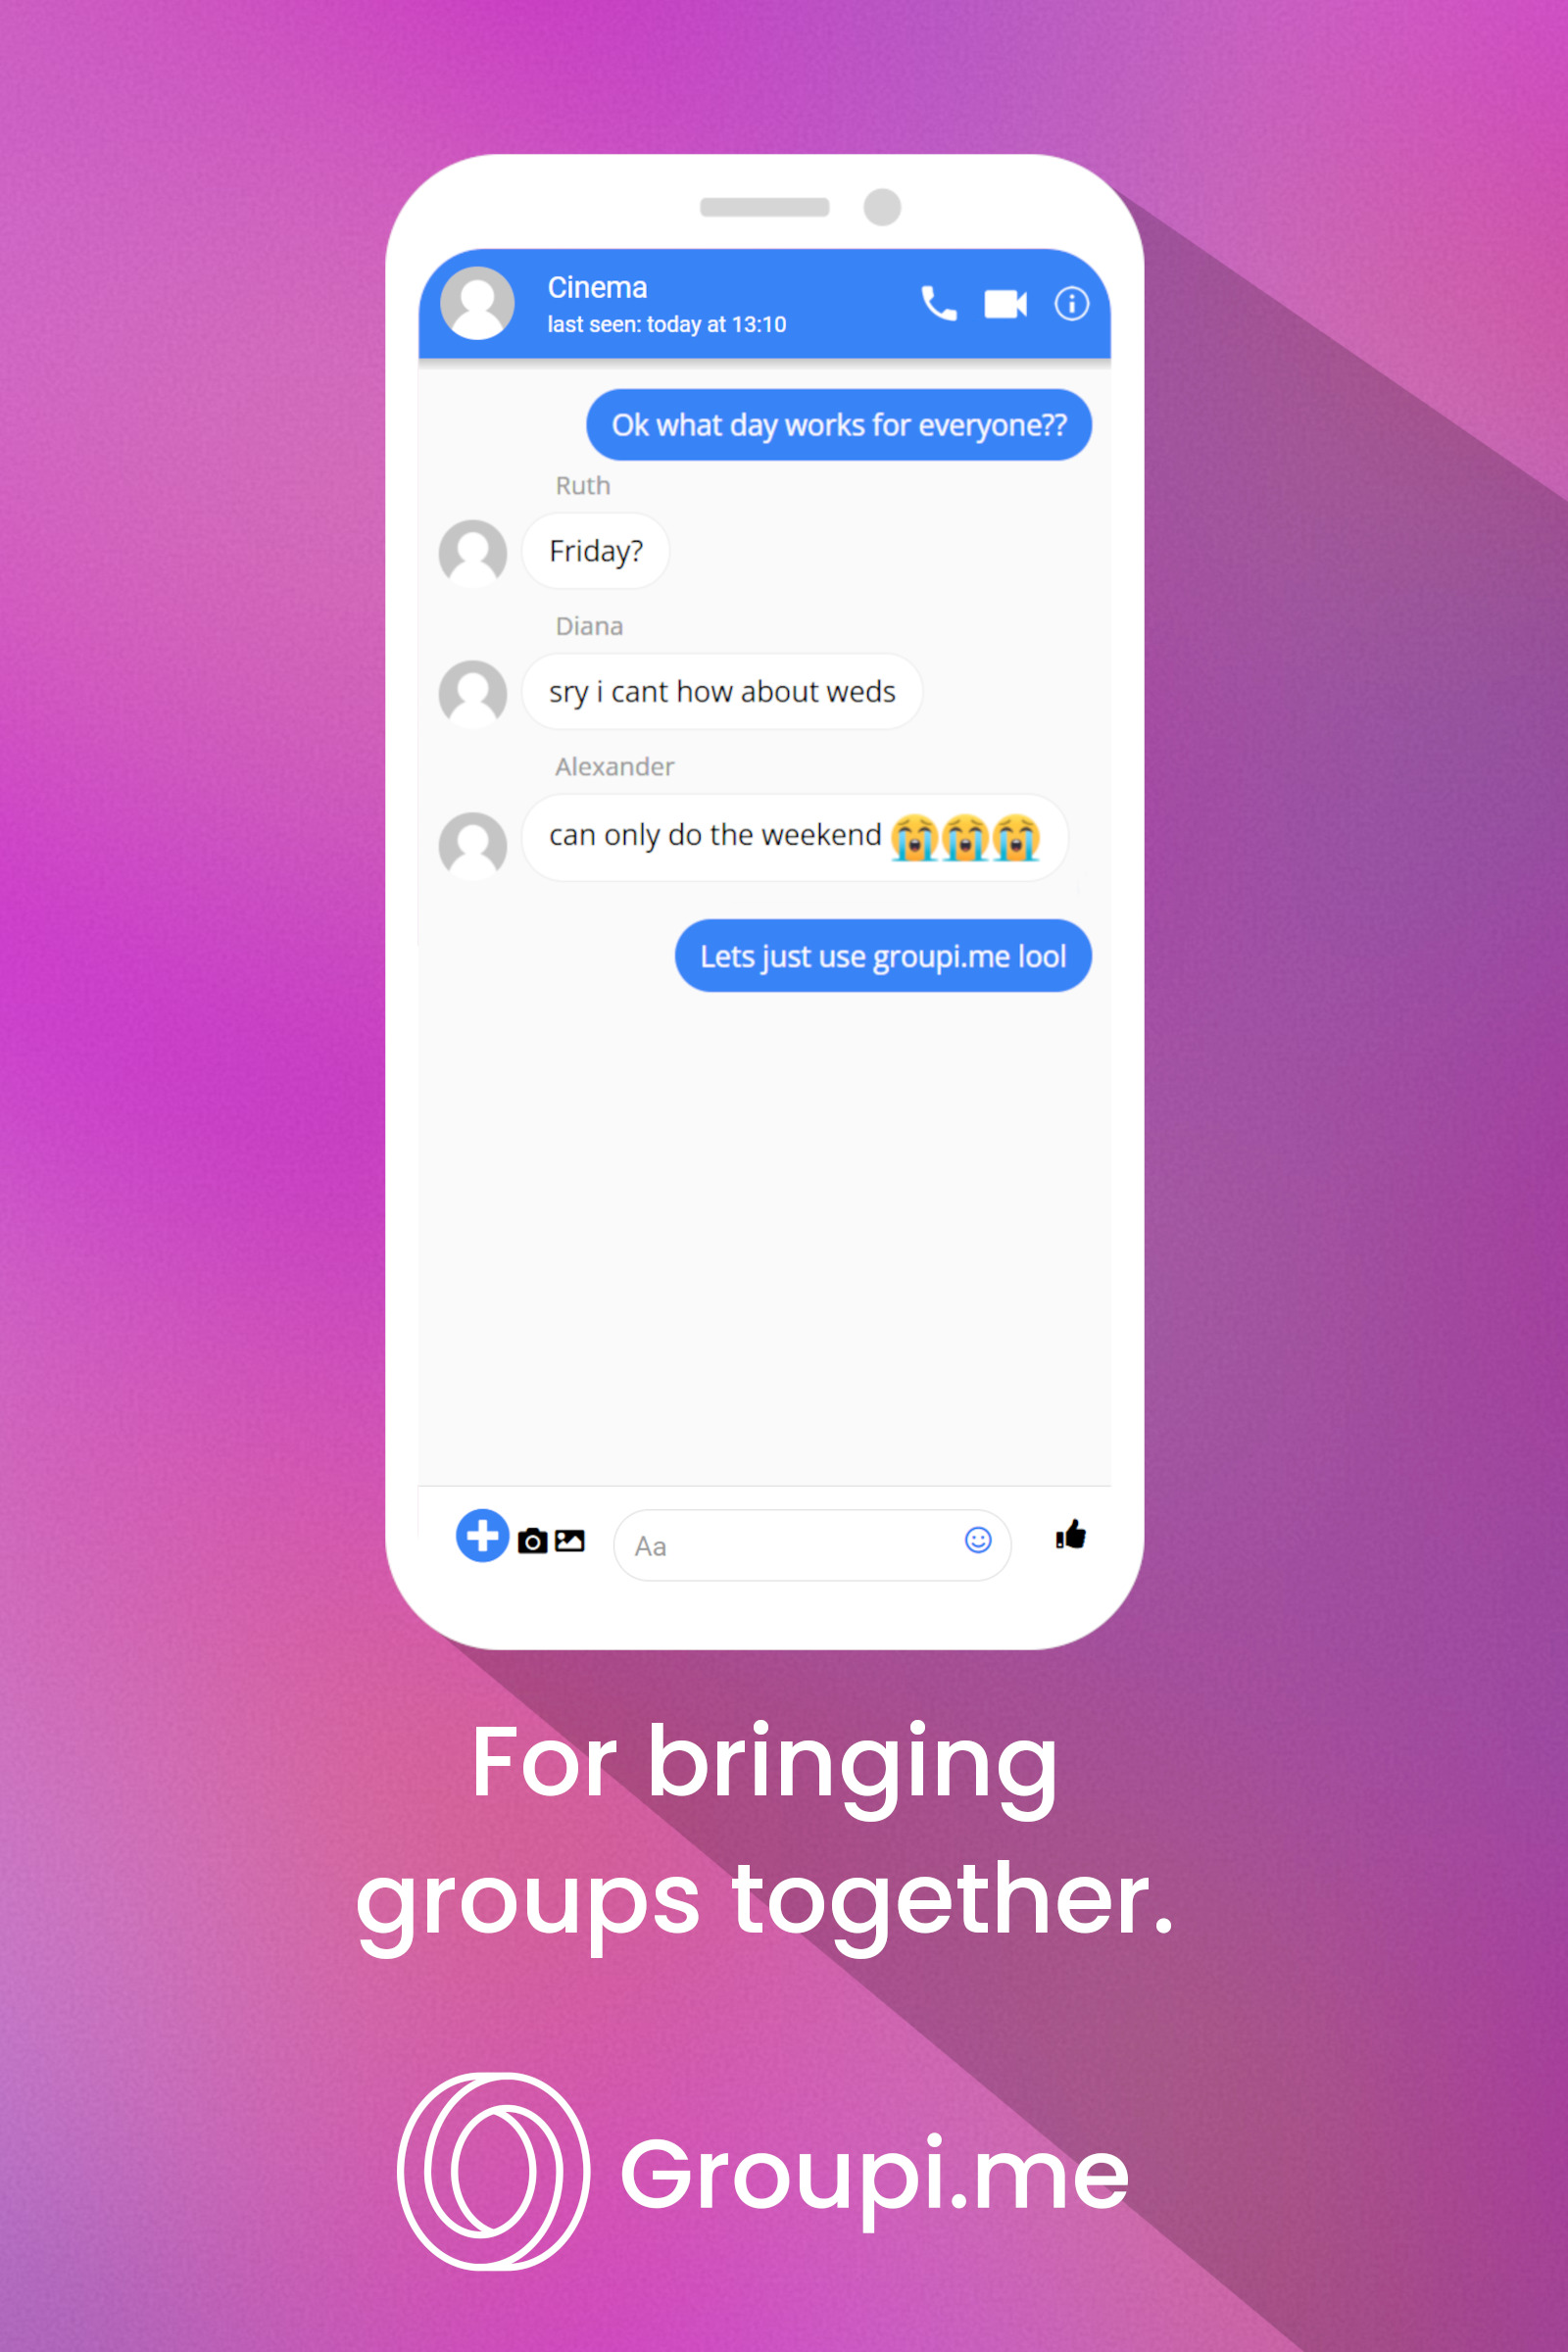 Chat ad for groupi.me